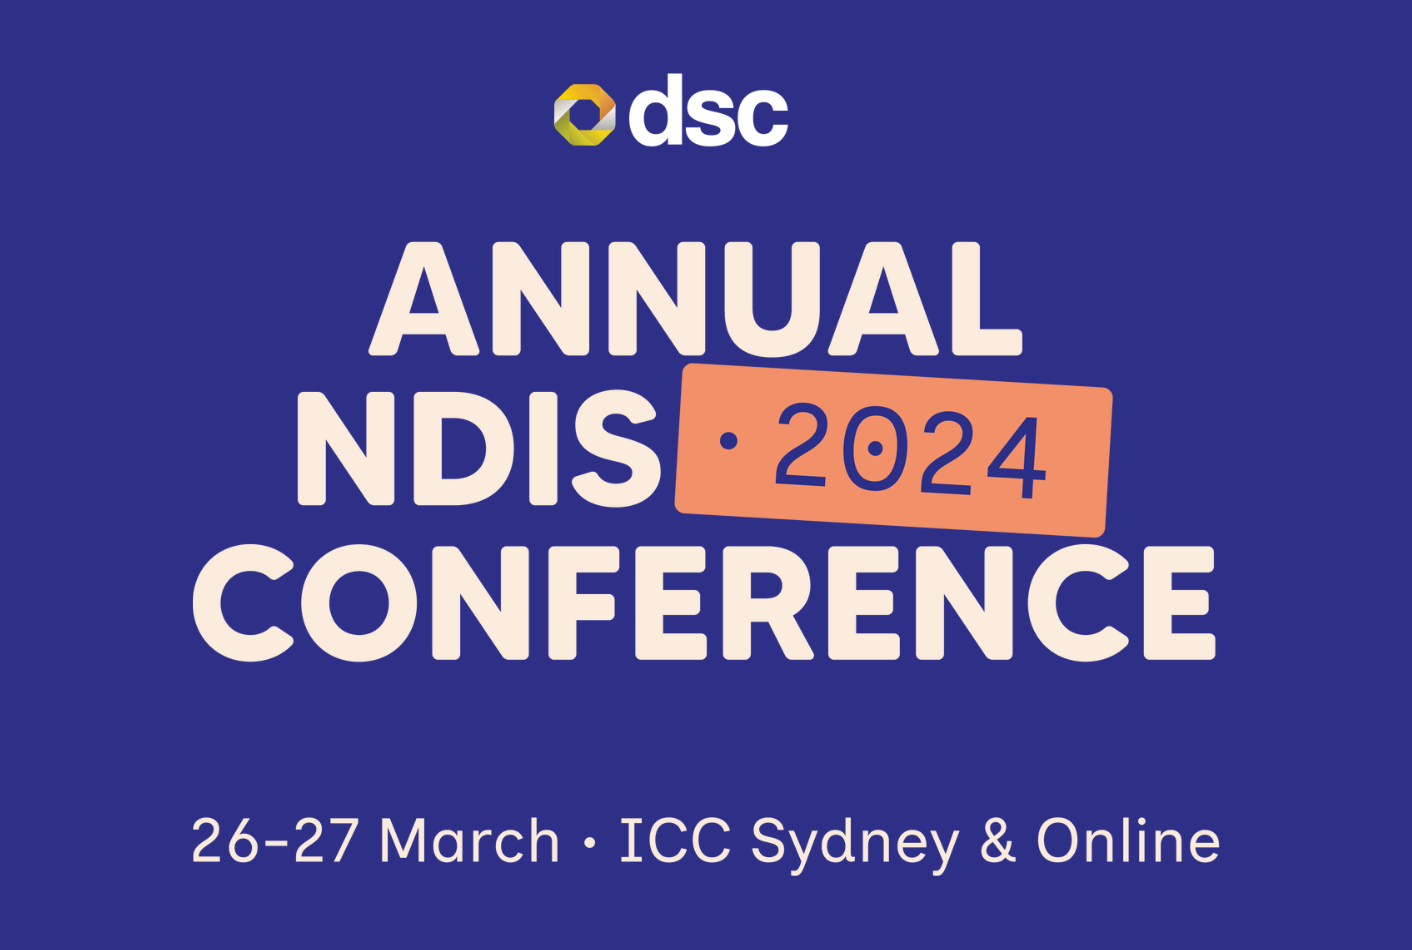 DSC Annual NDIS Conference 2024